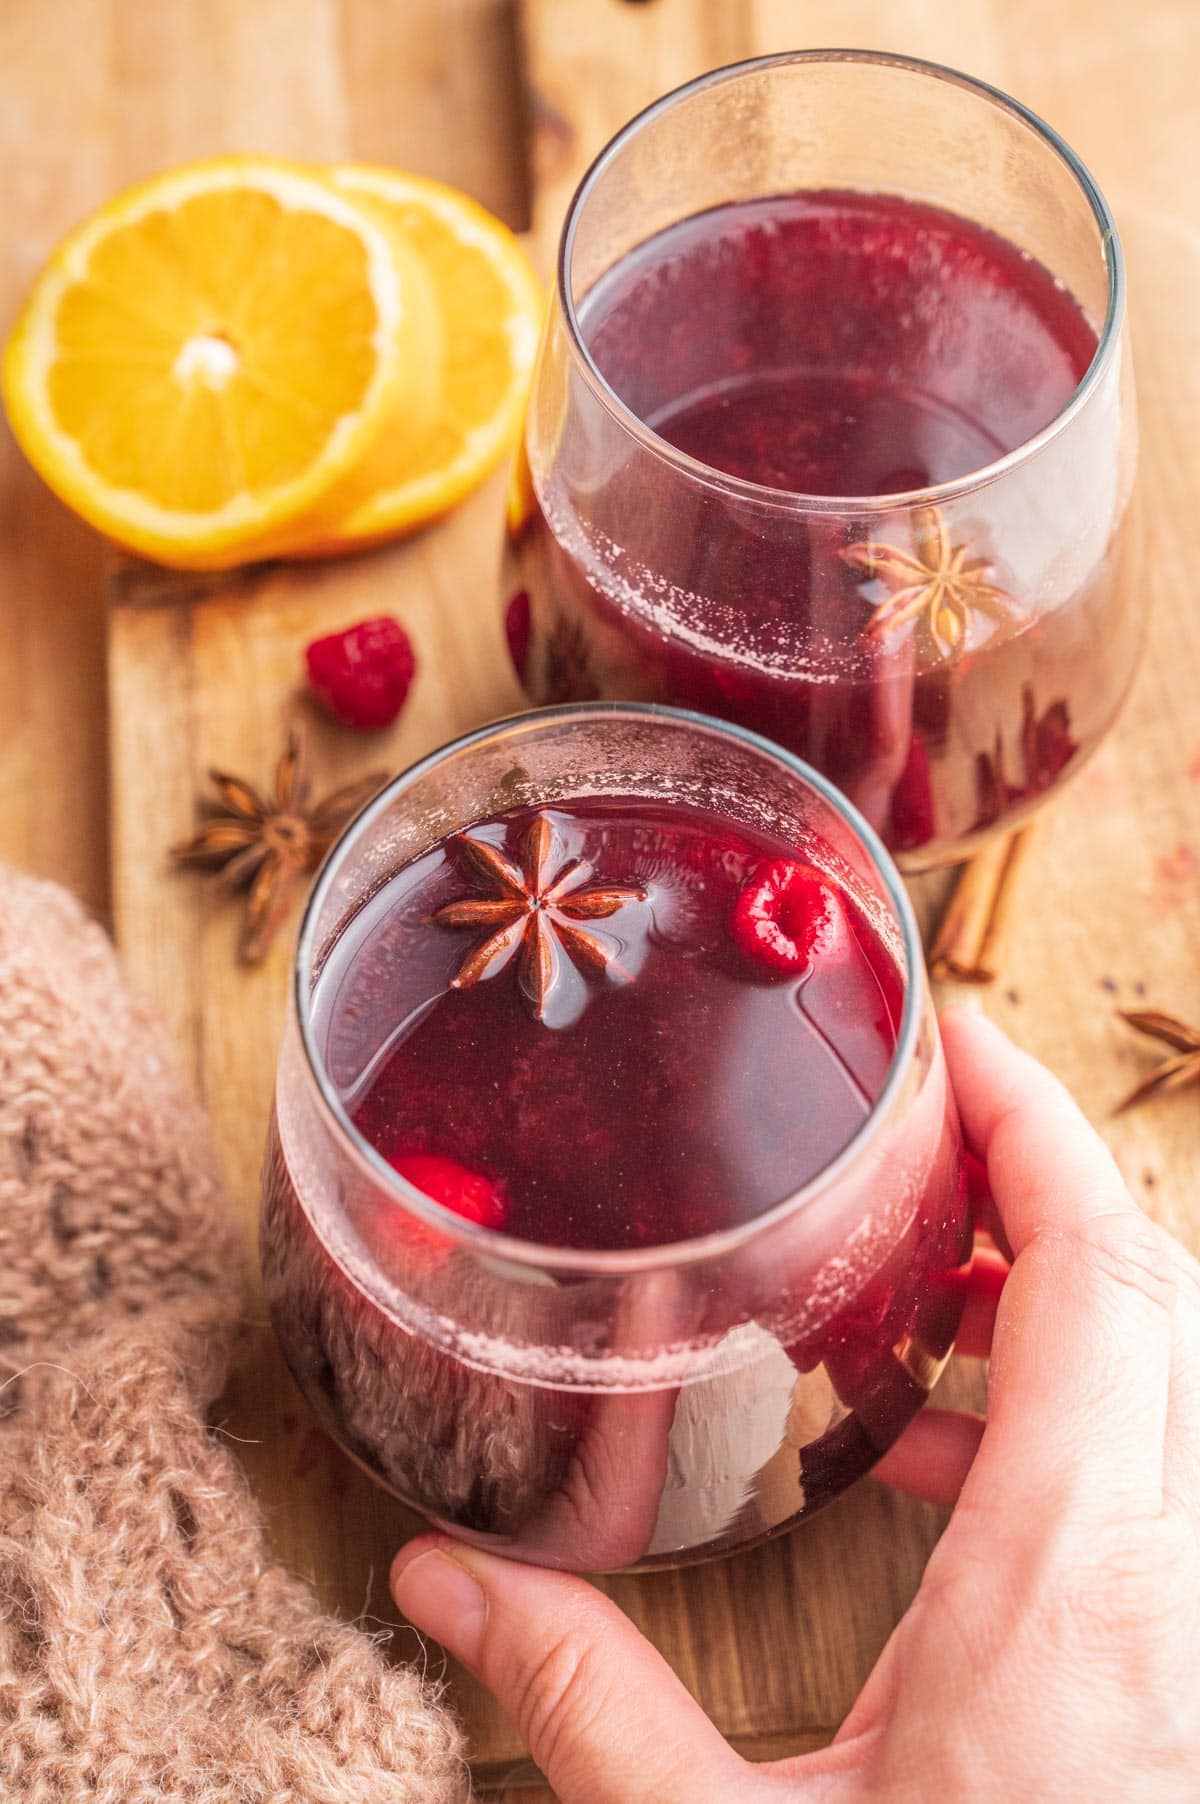 Two glassed with Polish mulled wine on a wooden board. One glass is being held by a hand.